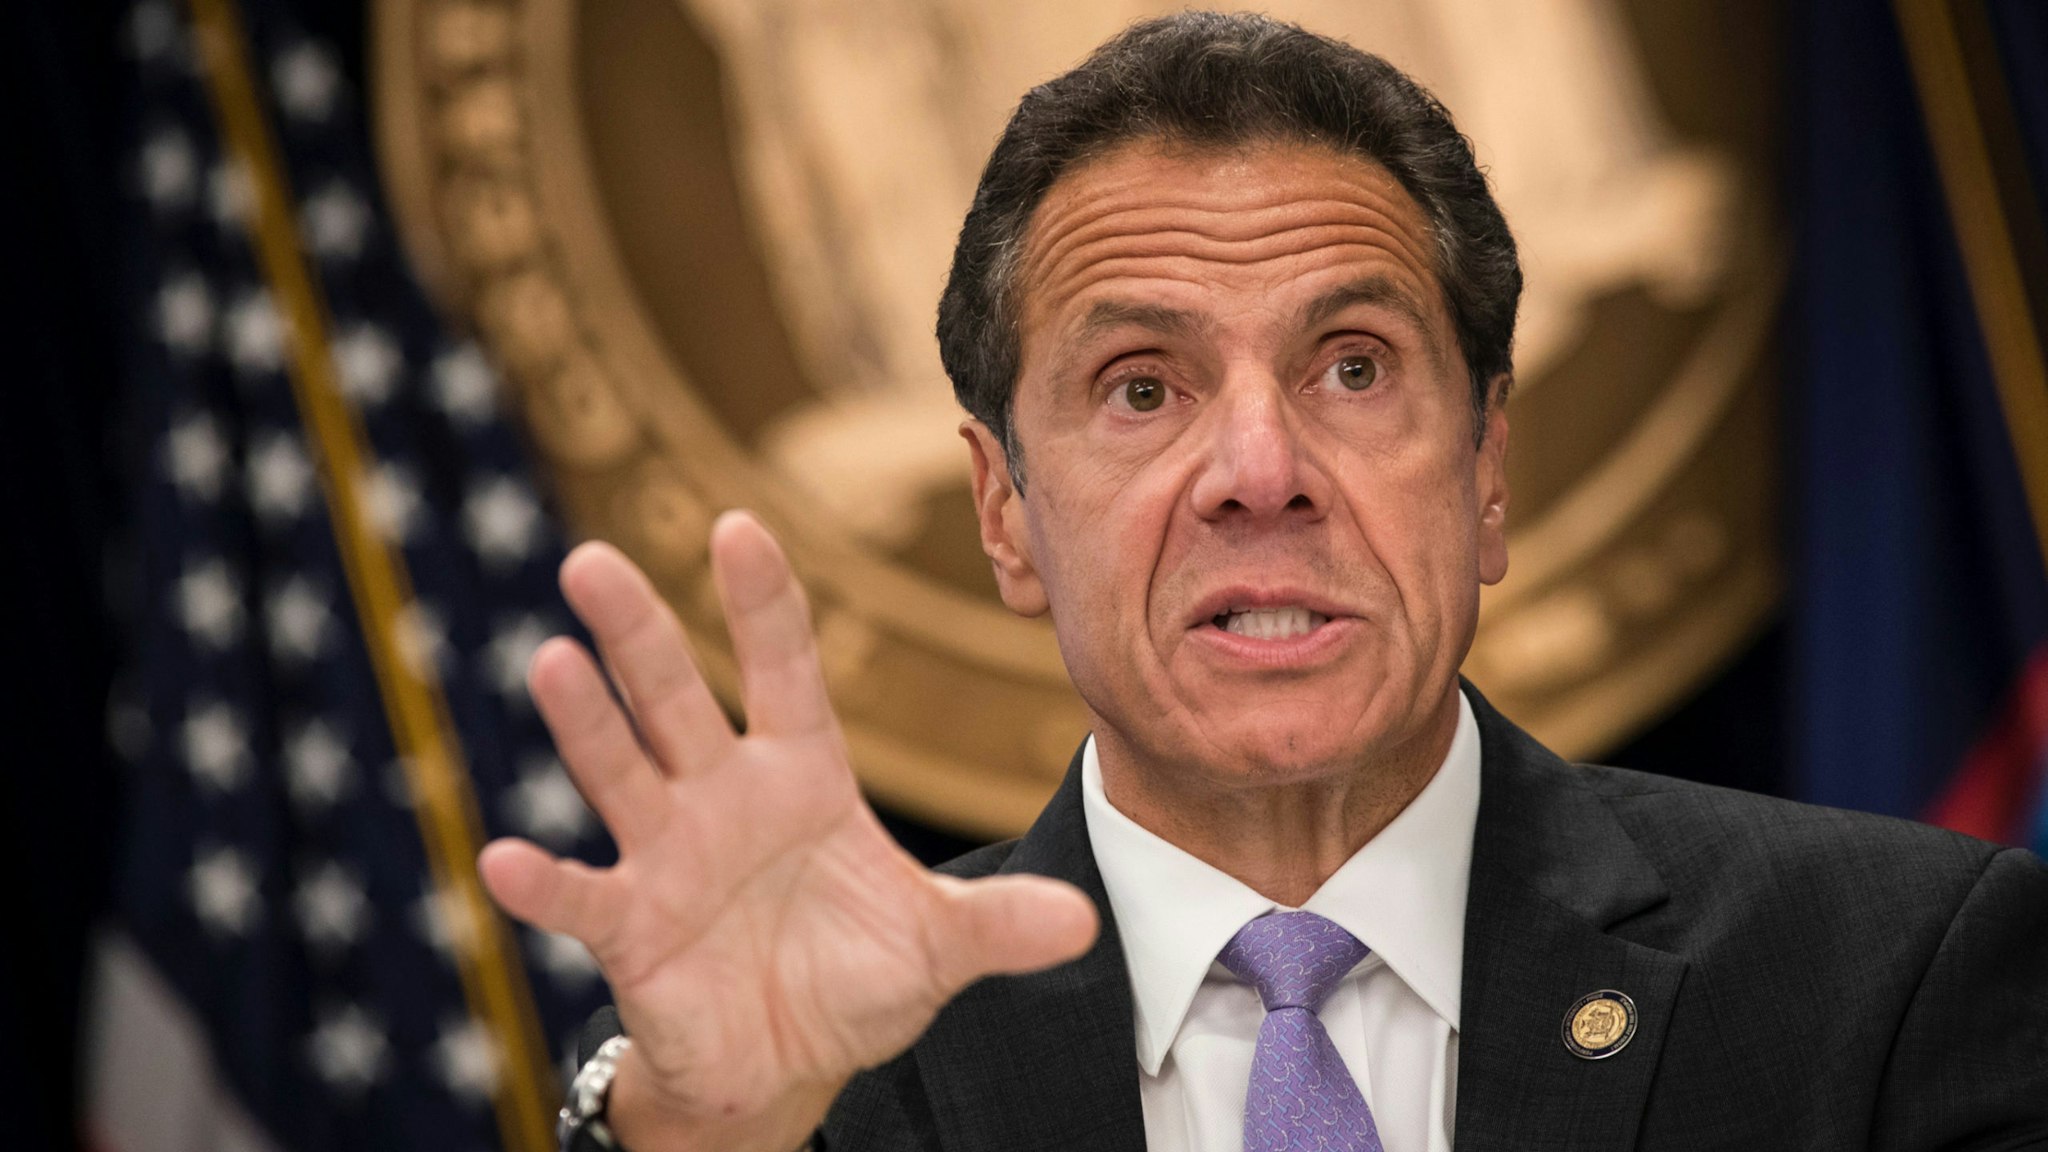 New York Governor Andrew Cuomo speaks during a press conference at his Midtown Manhattan office, September 14, 2018 in New York City.